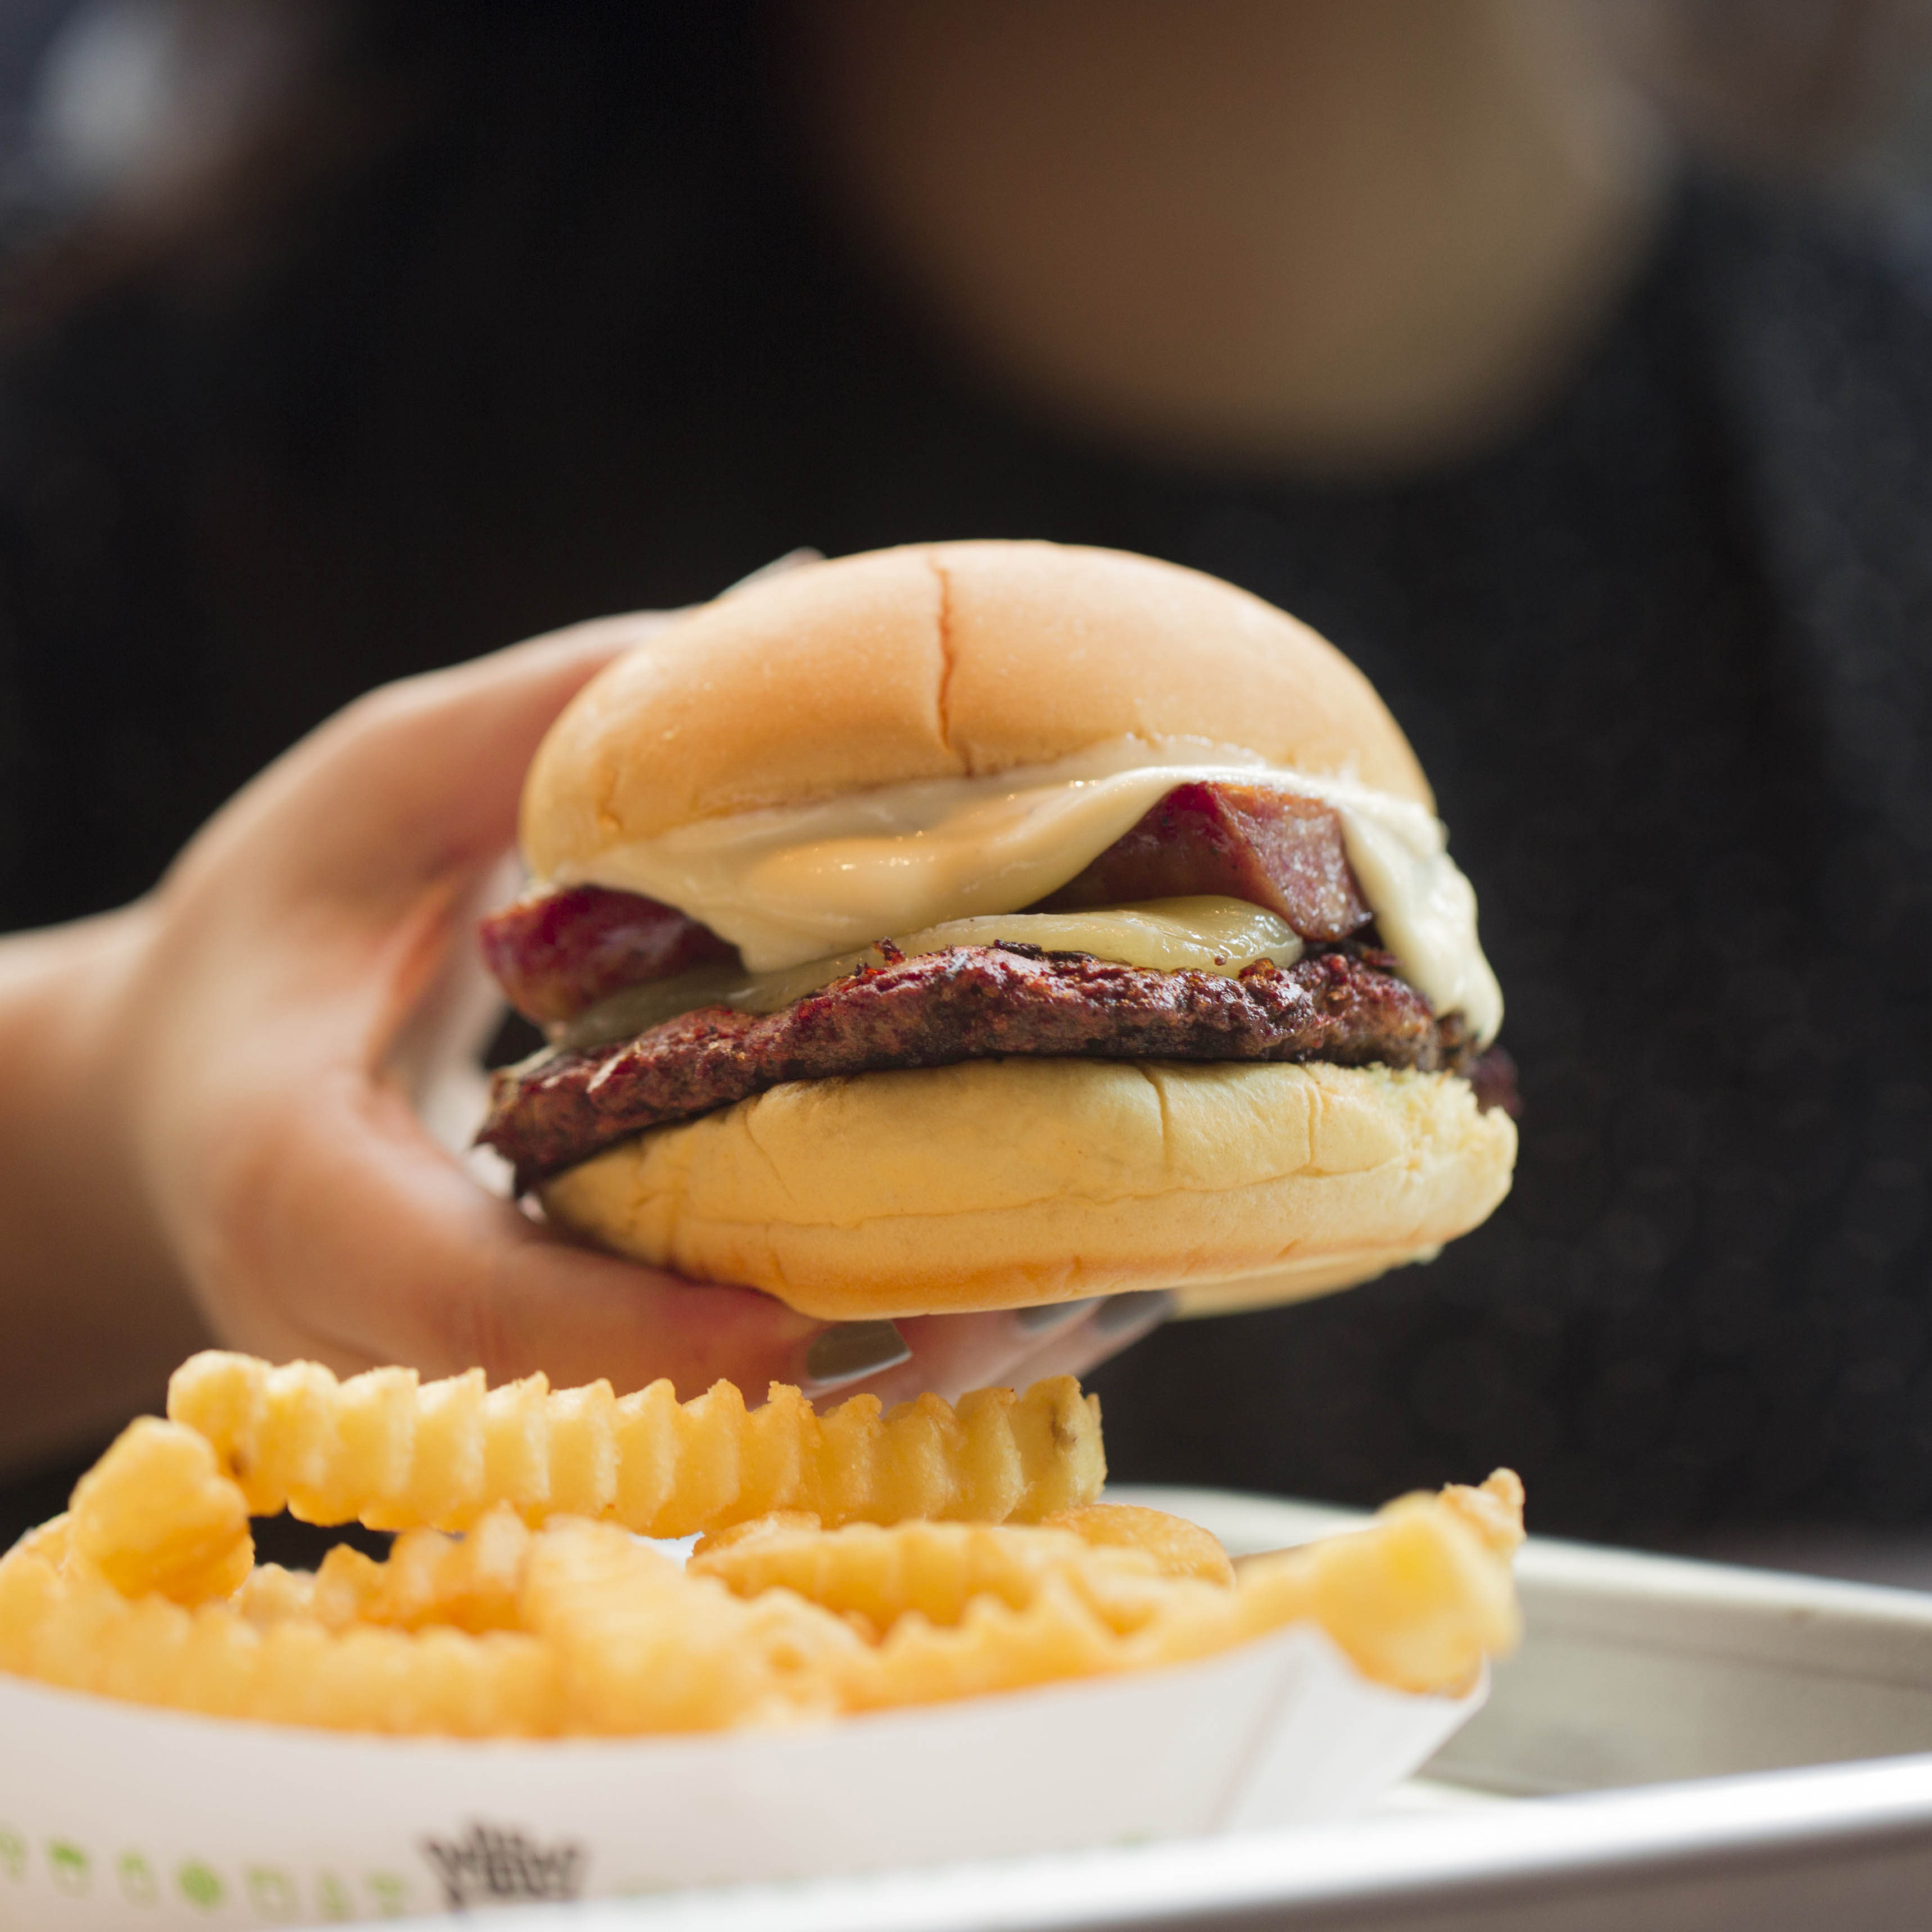 PQM BratBurger being held in a hand with fries in the foreground